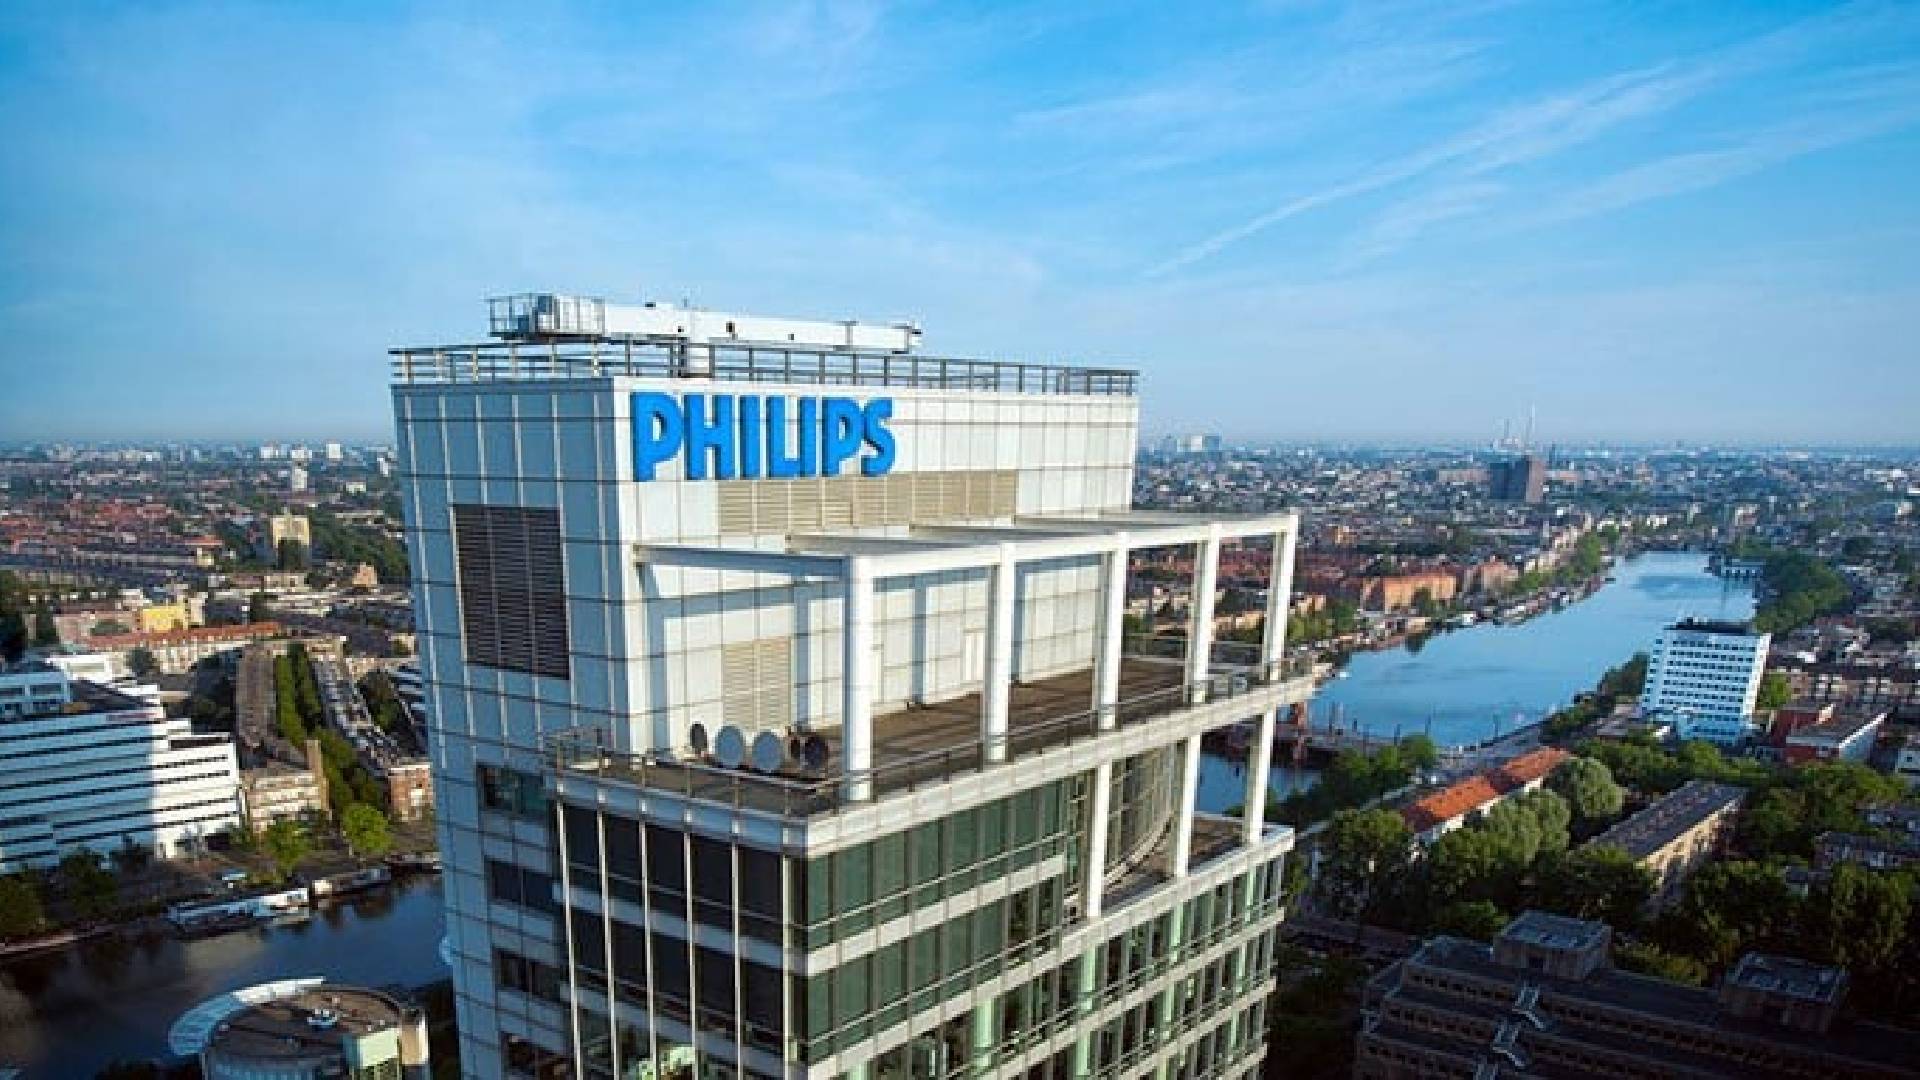 Philips Australia provides update to the Urgent Product Defect Correction related to certain devices in its sleep and respiratory portfolio